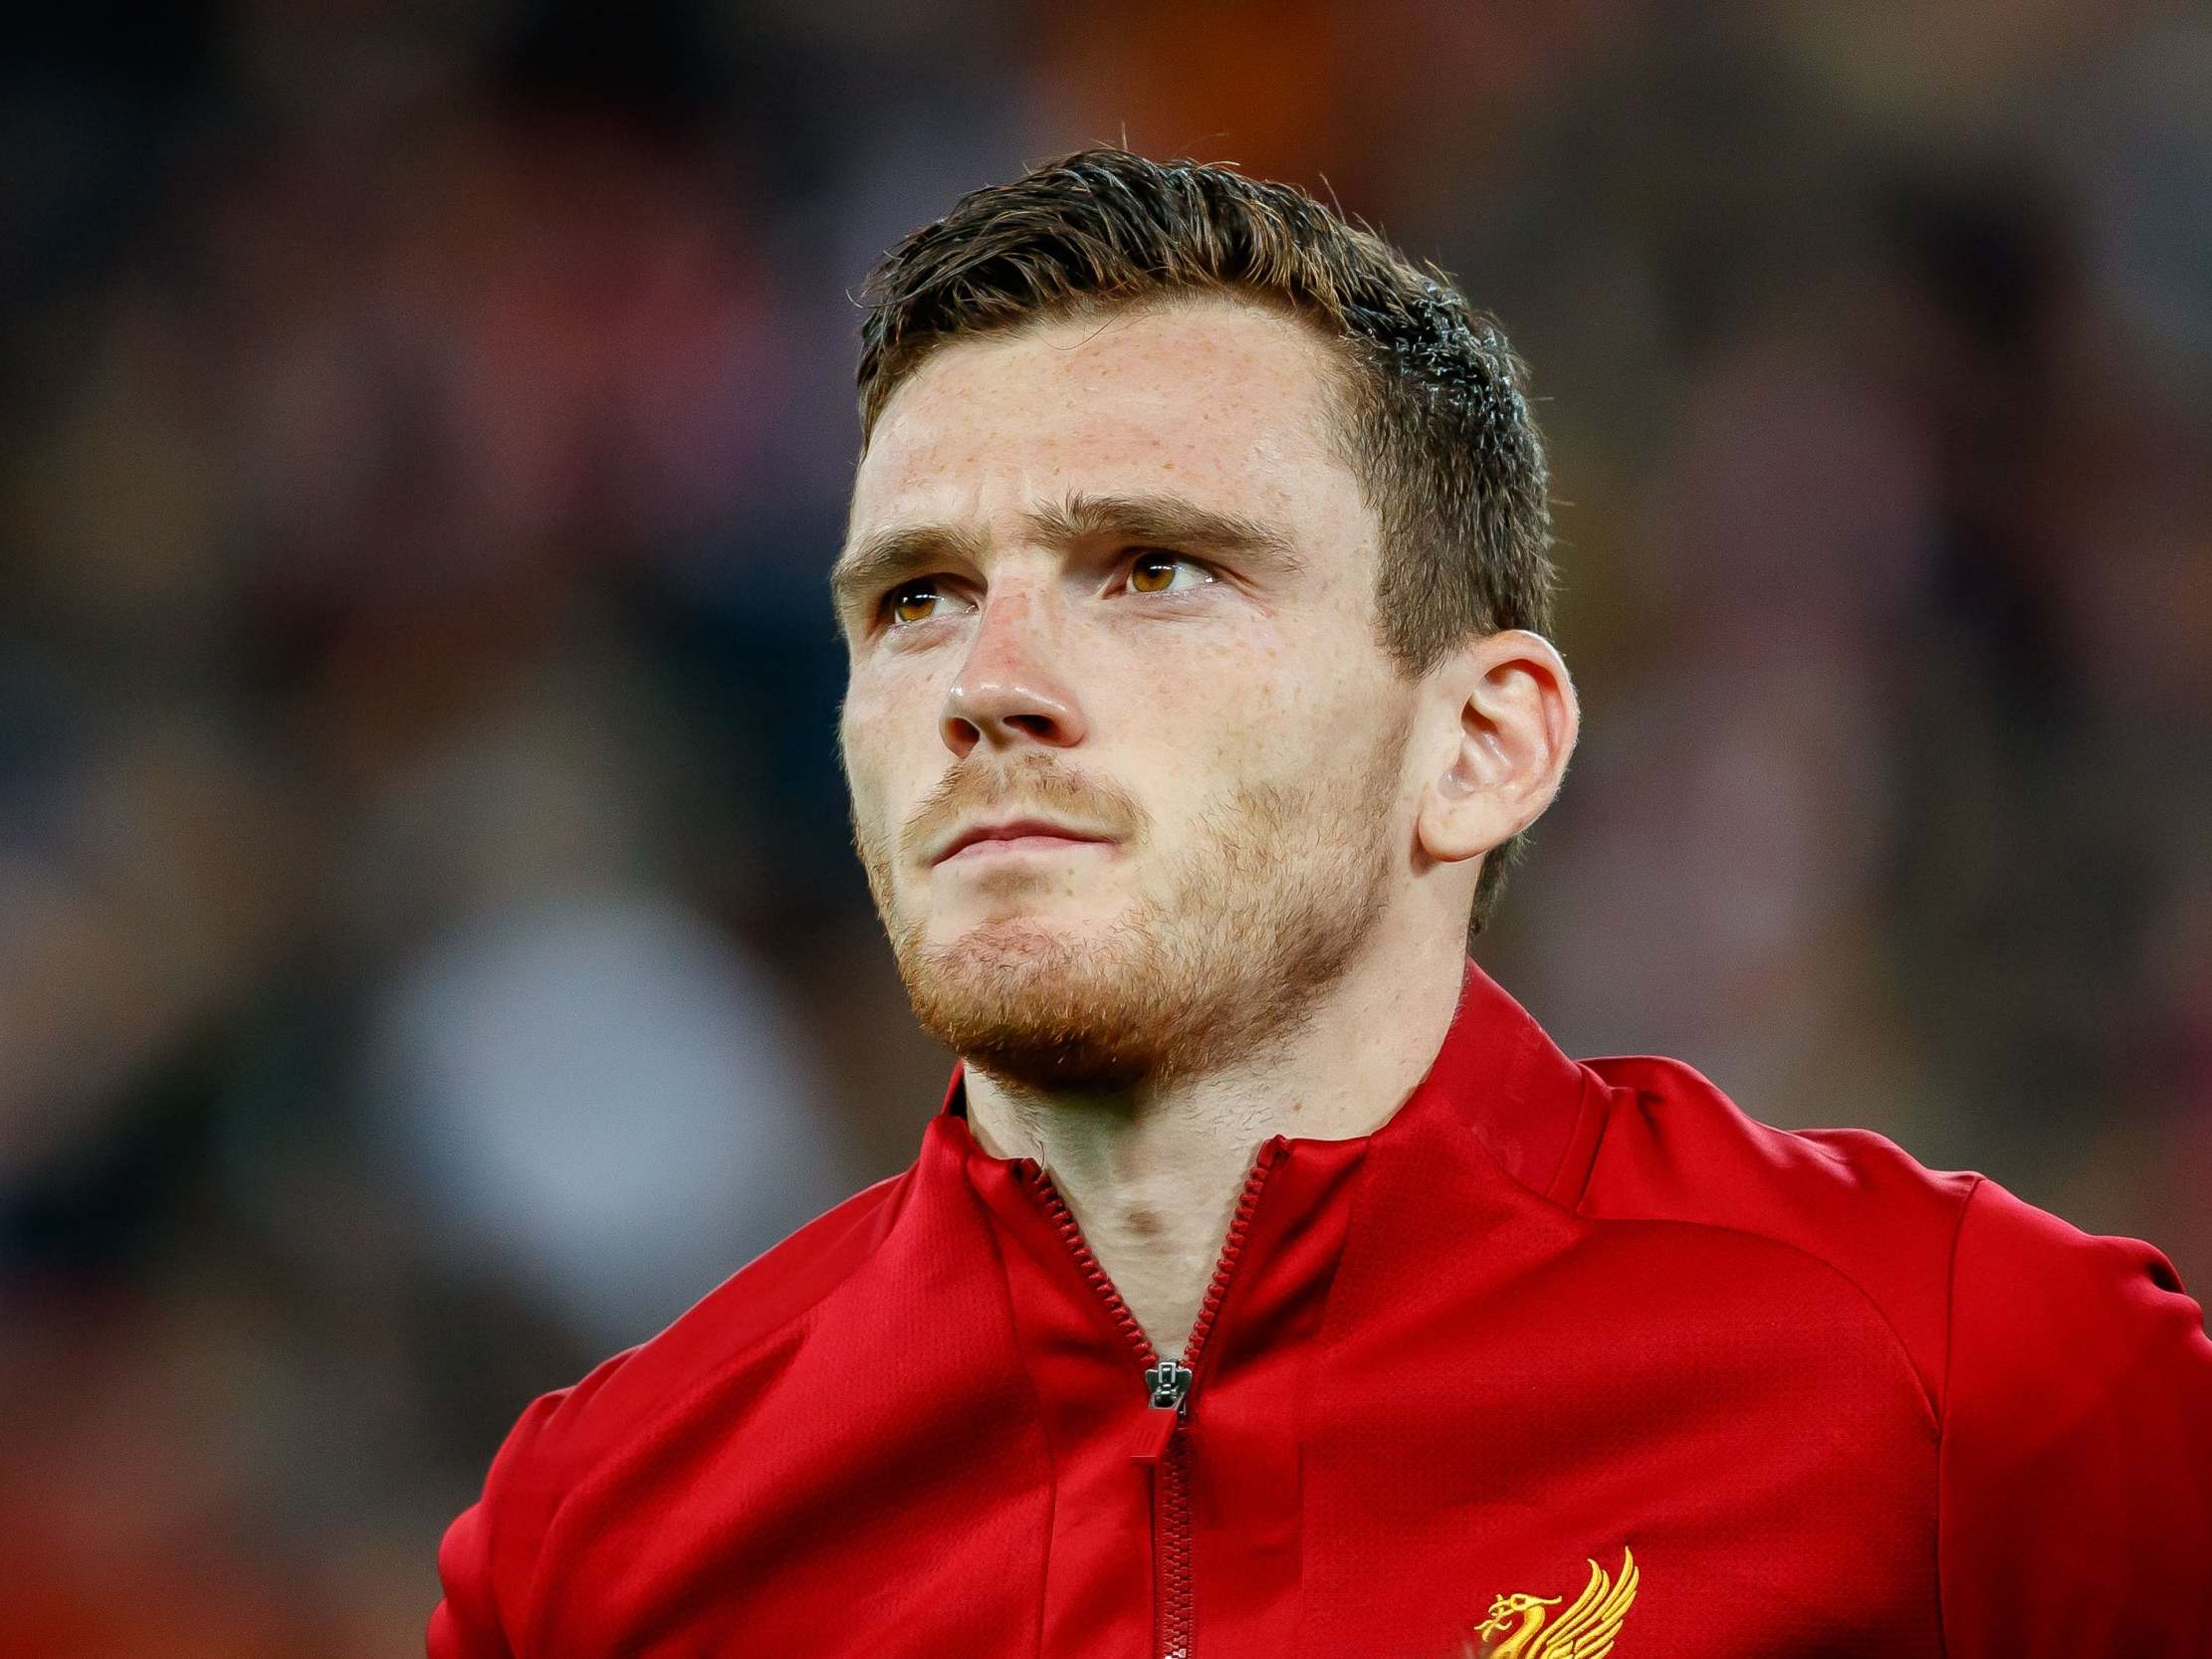 The 27-year old son of father (?) and mother(?) Andrew Robertson in 2022 photo. Andrew Robertson earned a 2.6 million dollar salary - leaving the net worth at  million in 2022